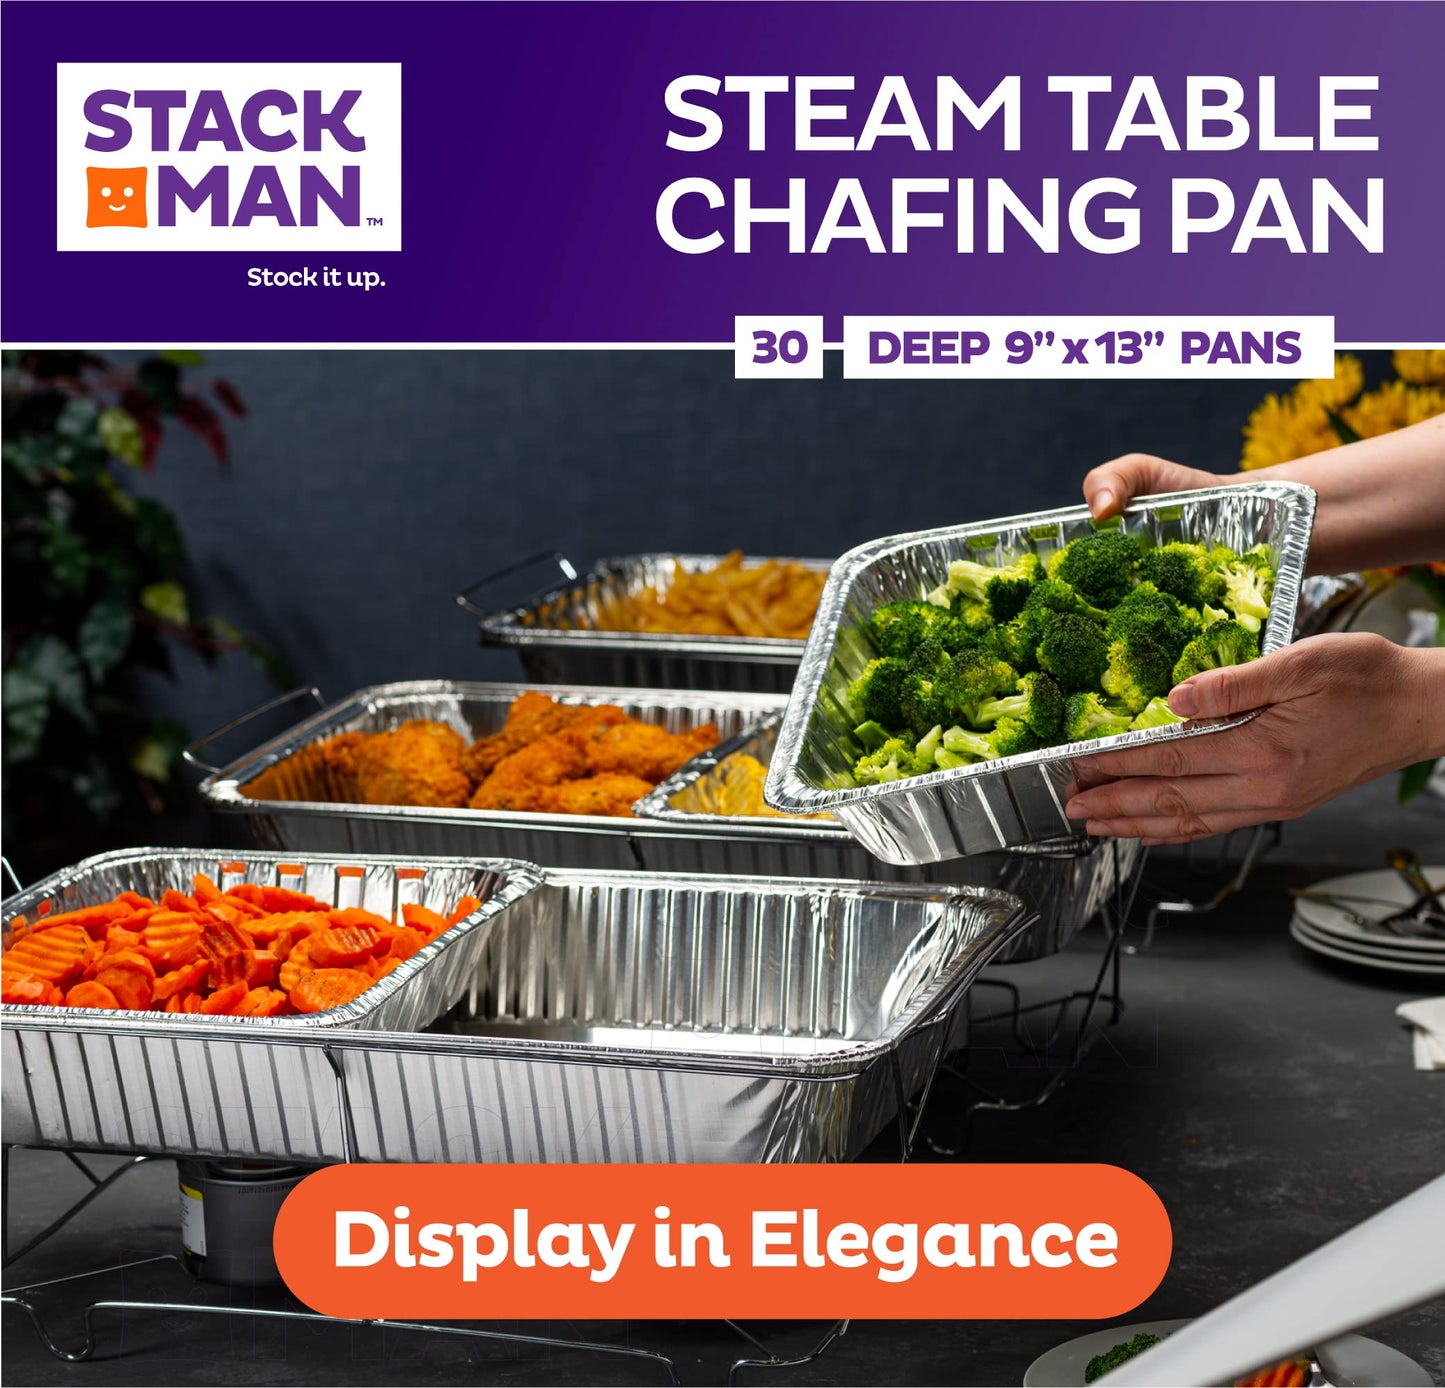 Aluminum Pans 9x13 Disposable Aluminum Foil Pans [30-Pack] Large Baking Pan Trays - Heavy Duty Tin Tray Half Size Chafing Dishes. Food Containers for Roasting, Cooking, Heating or Steam Table